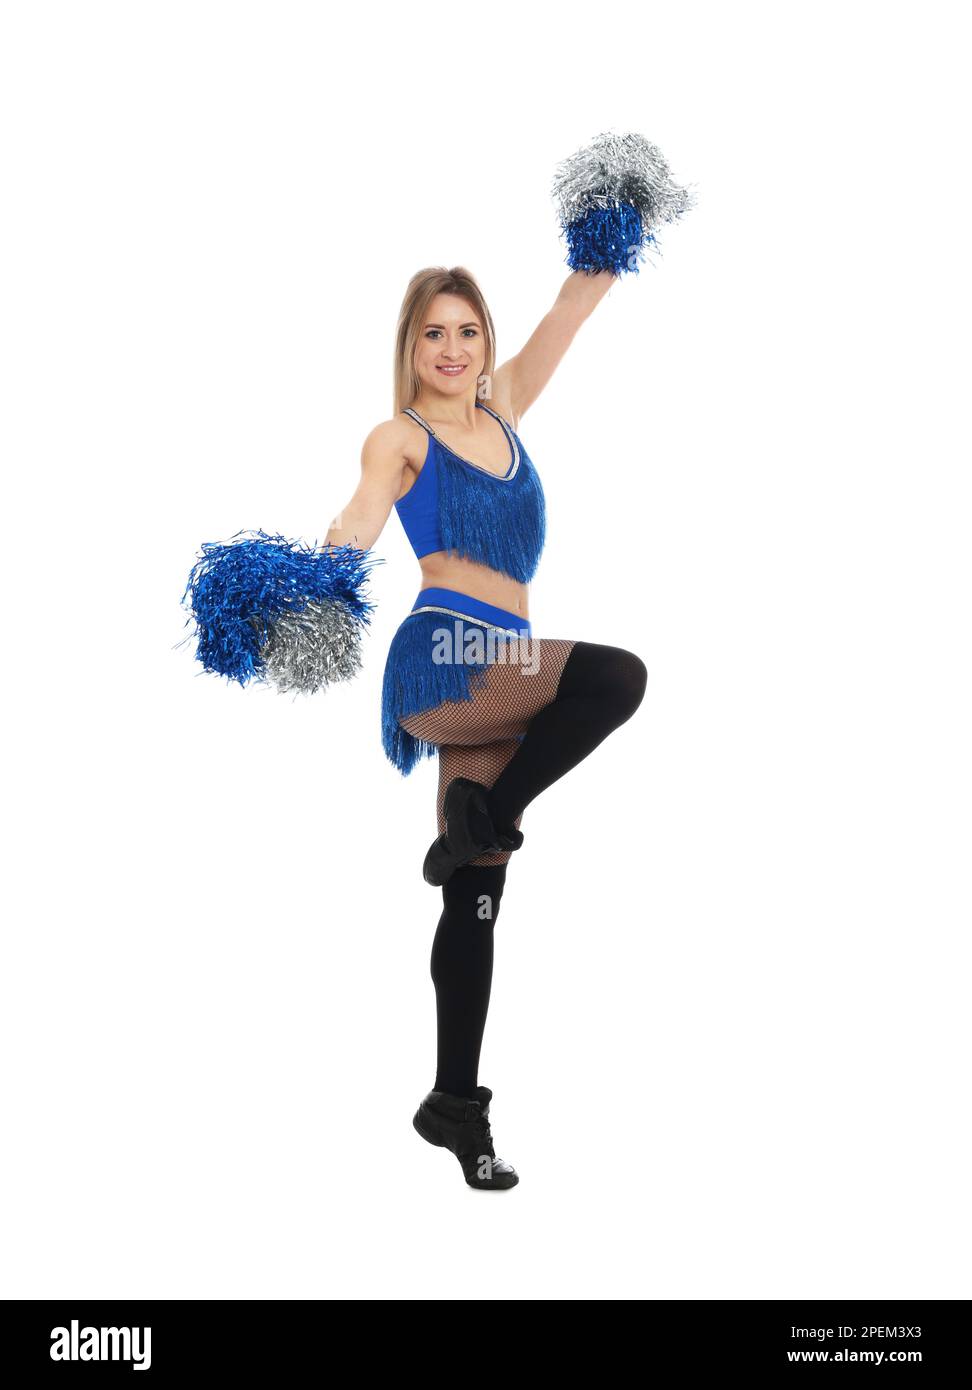 Cheerleading pom poms Cut Out Stock Images & Pictures - Page 3 - Alamy